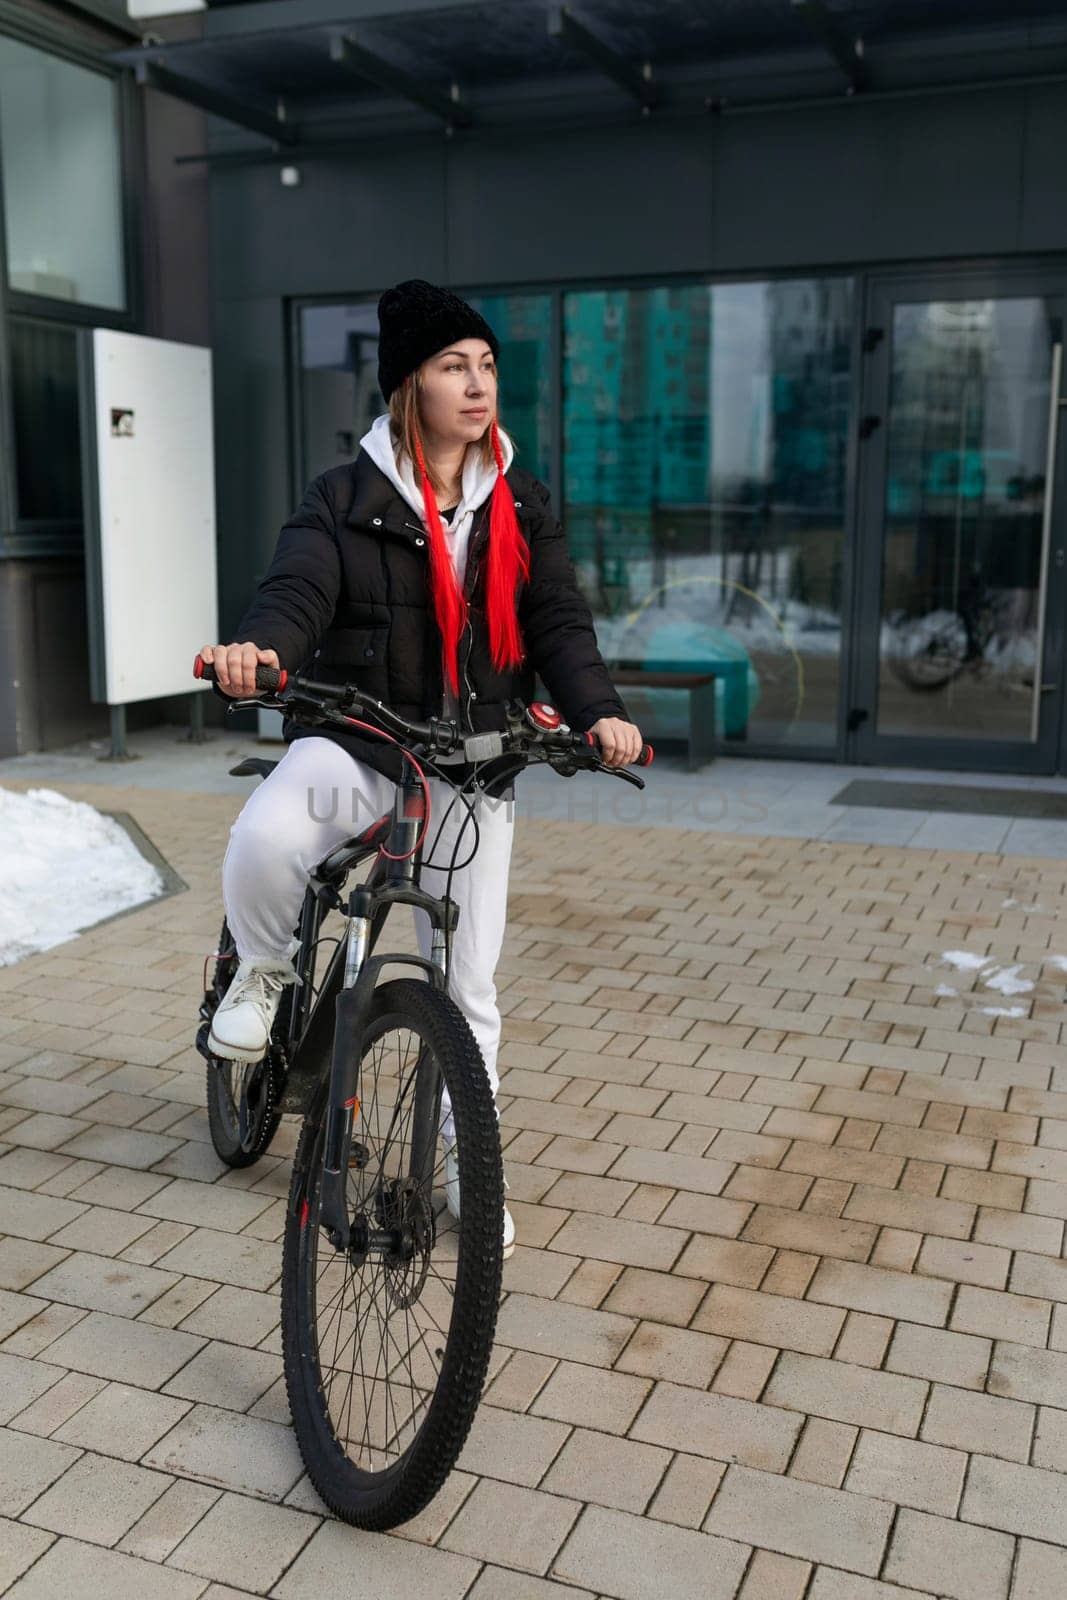 A woman took a rented bicycle with her outside in winter.